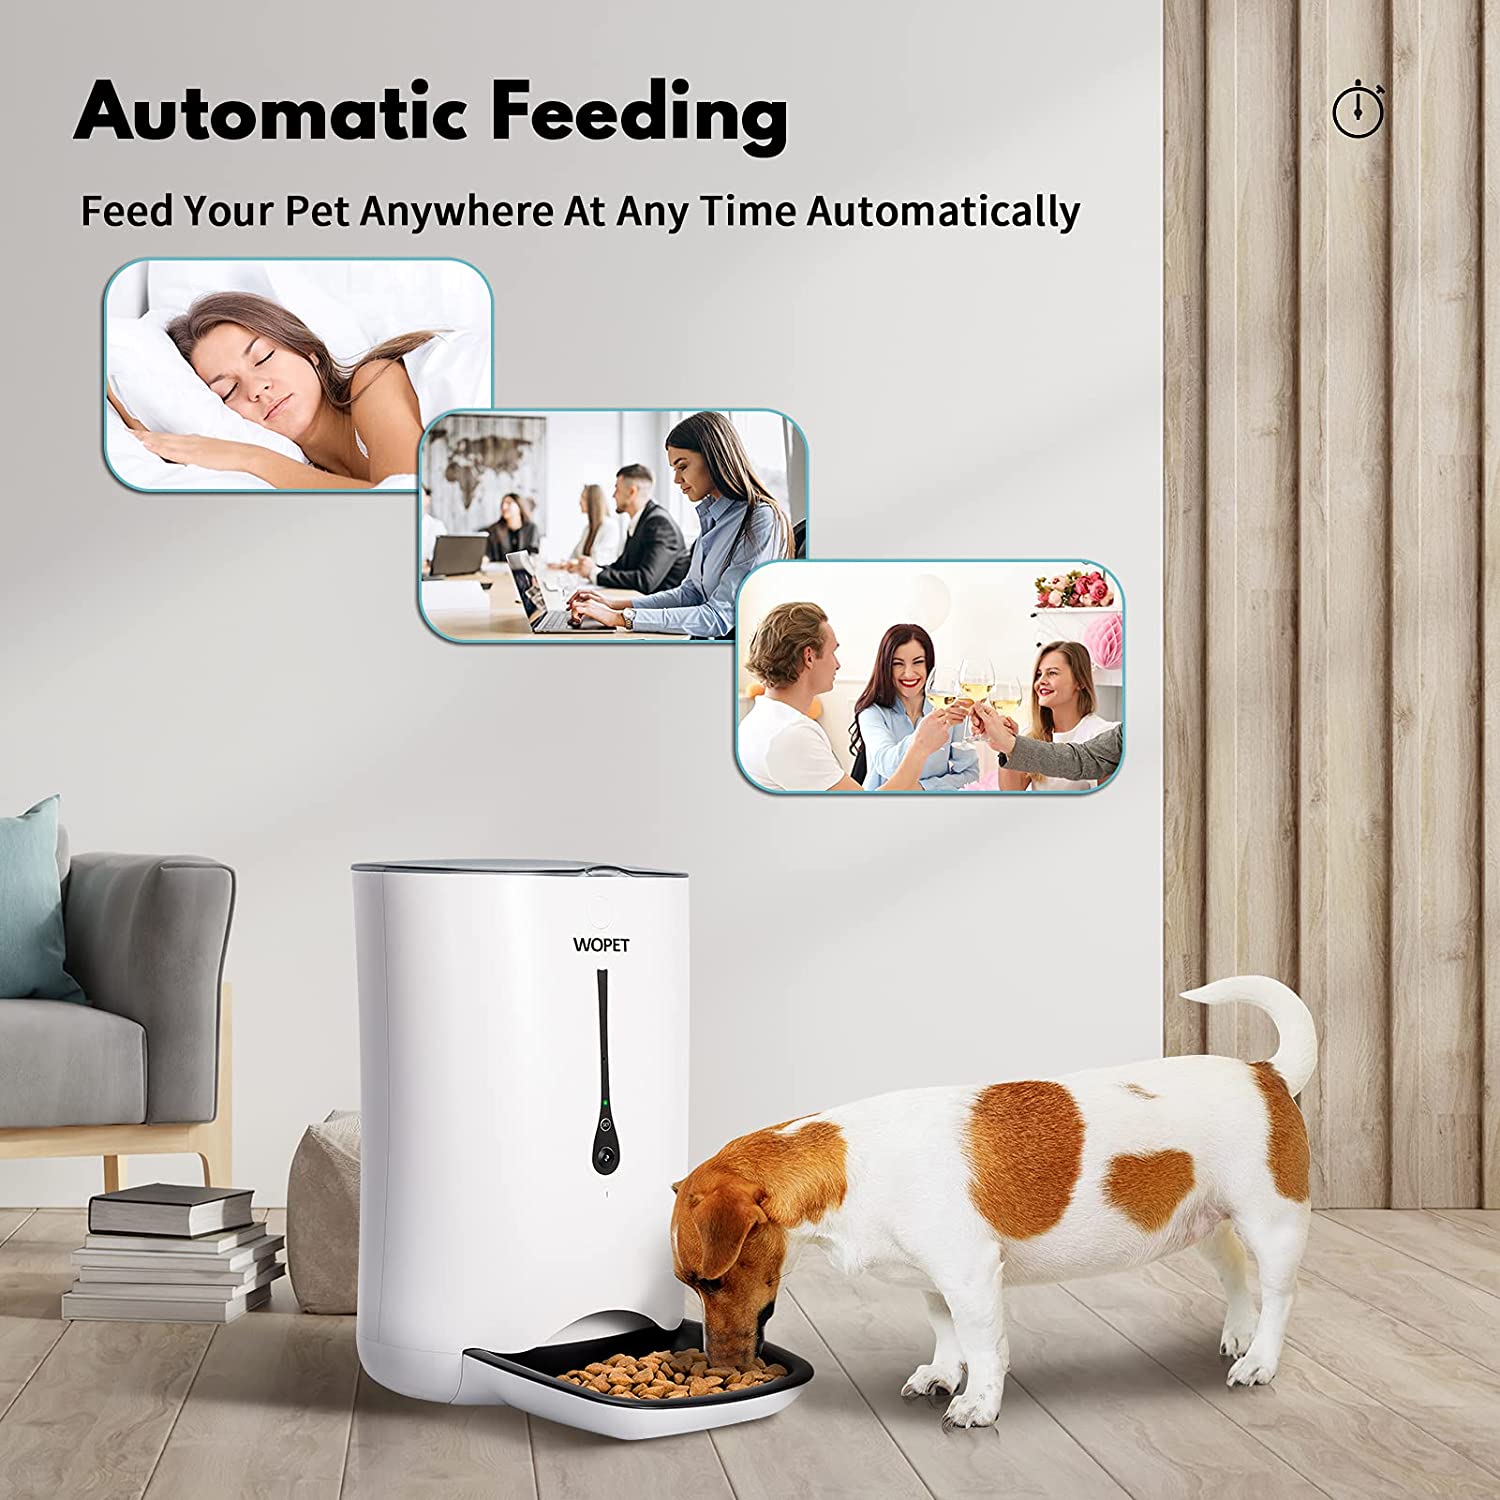 WOPET SmartFeeder,Automatic Pet Dog and Cat Feeder,6-Meal Auto Pet Feeder with Timer Programmable,HD Camera for Voice and Video Recording,Wi-Fi Enabled App for iPhone and Android